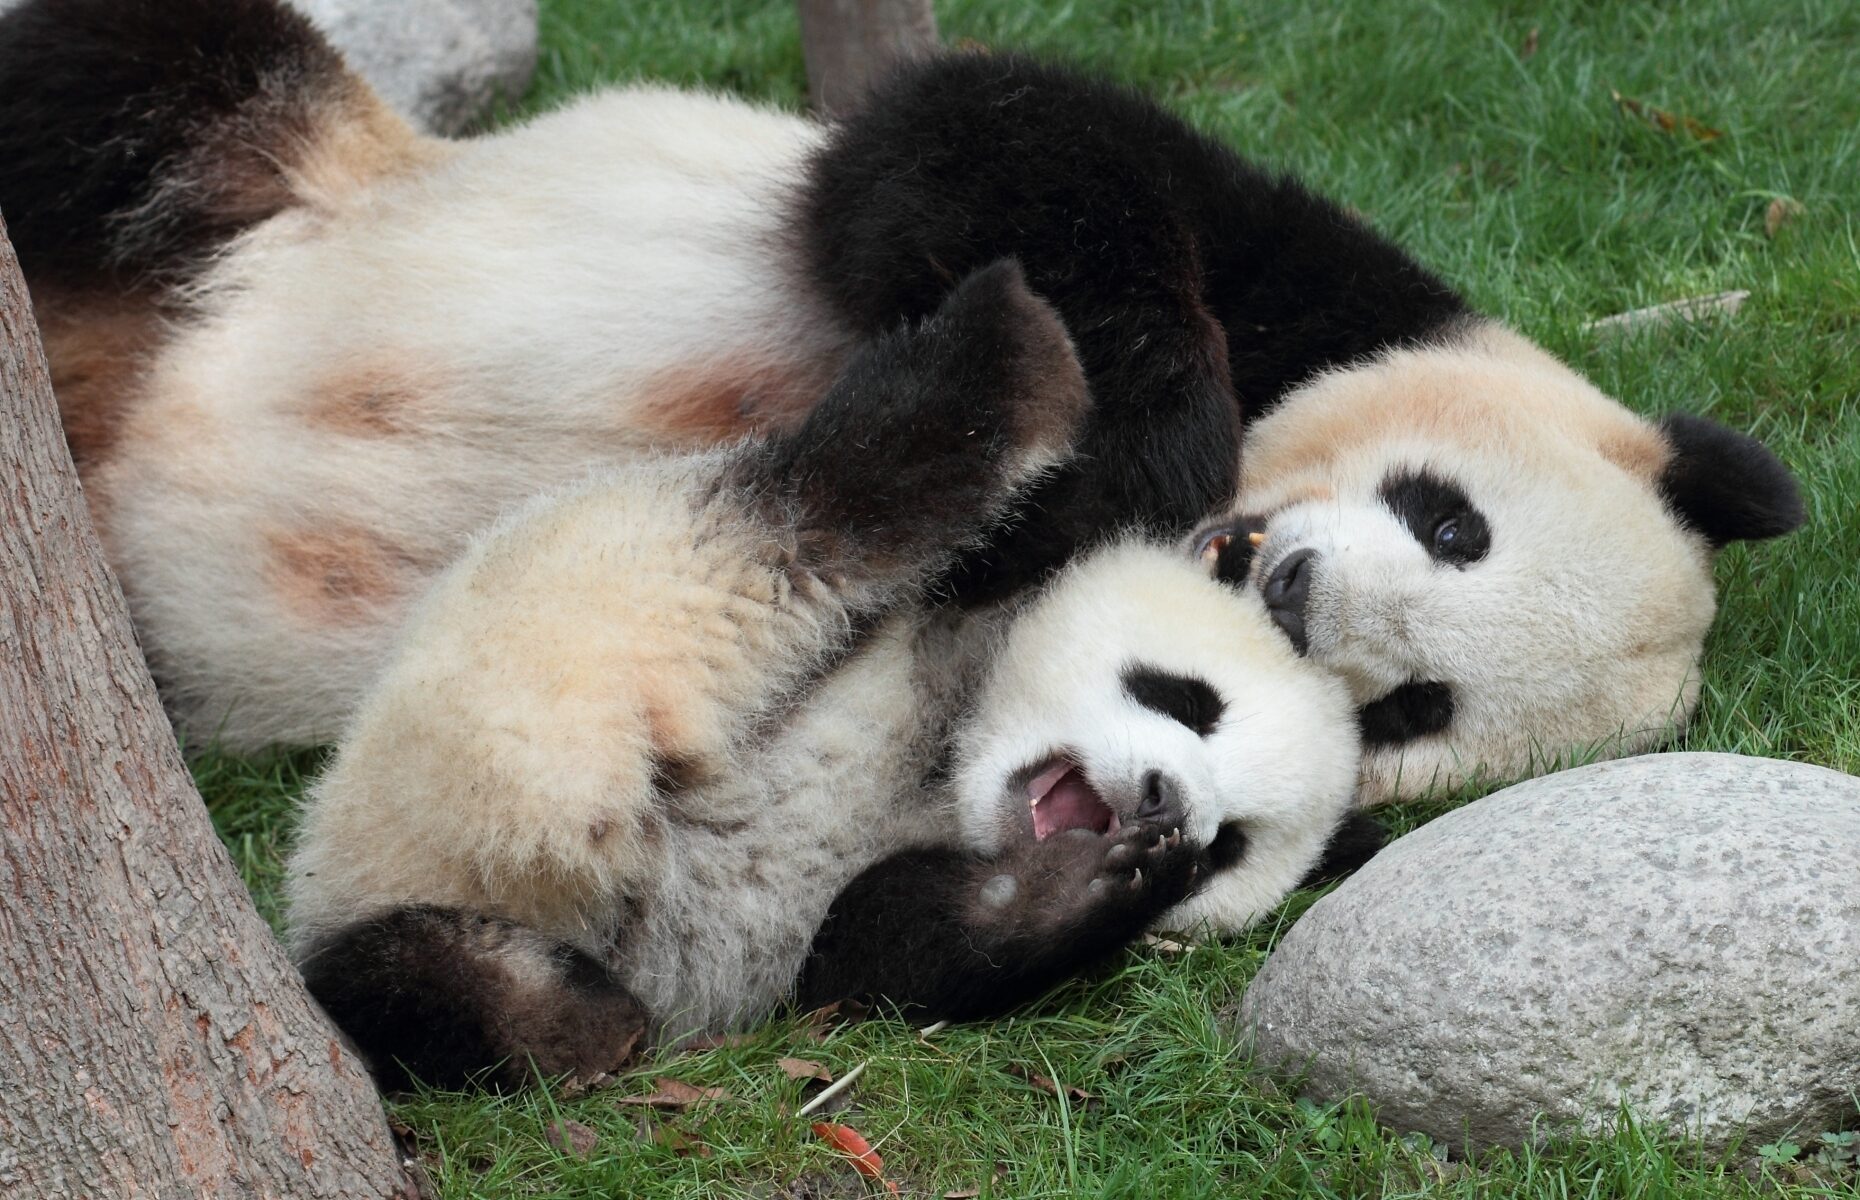 Everything you need to know about pandas